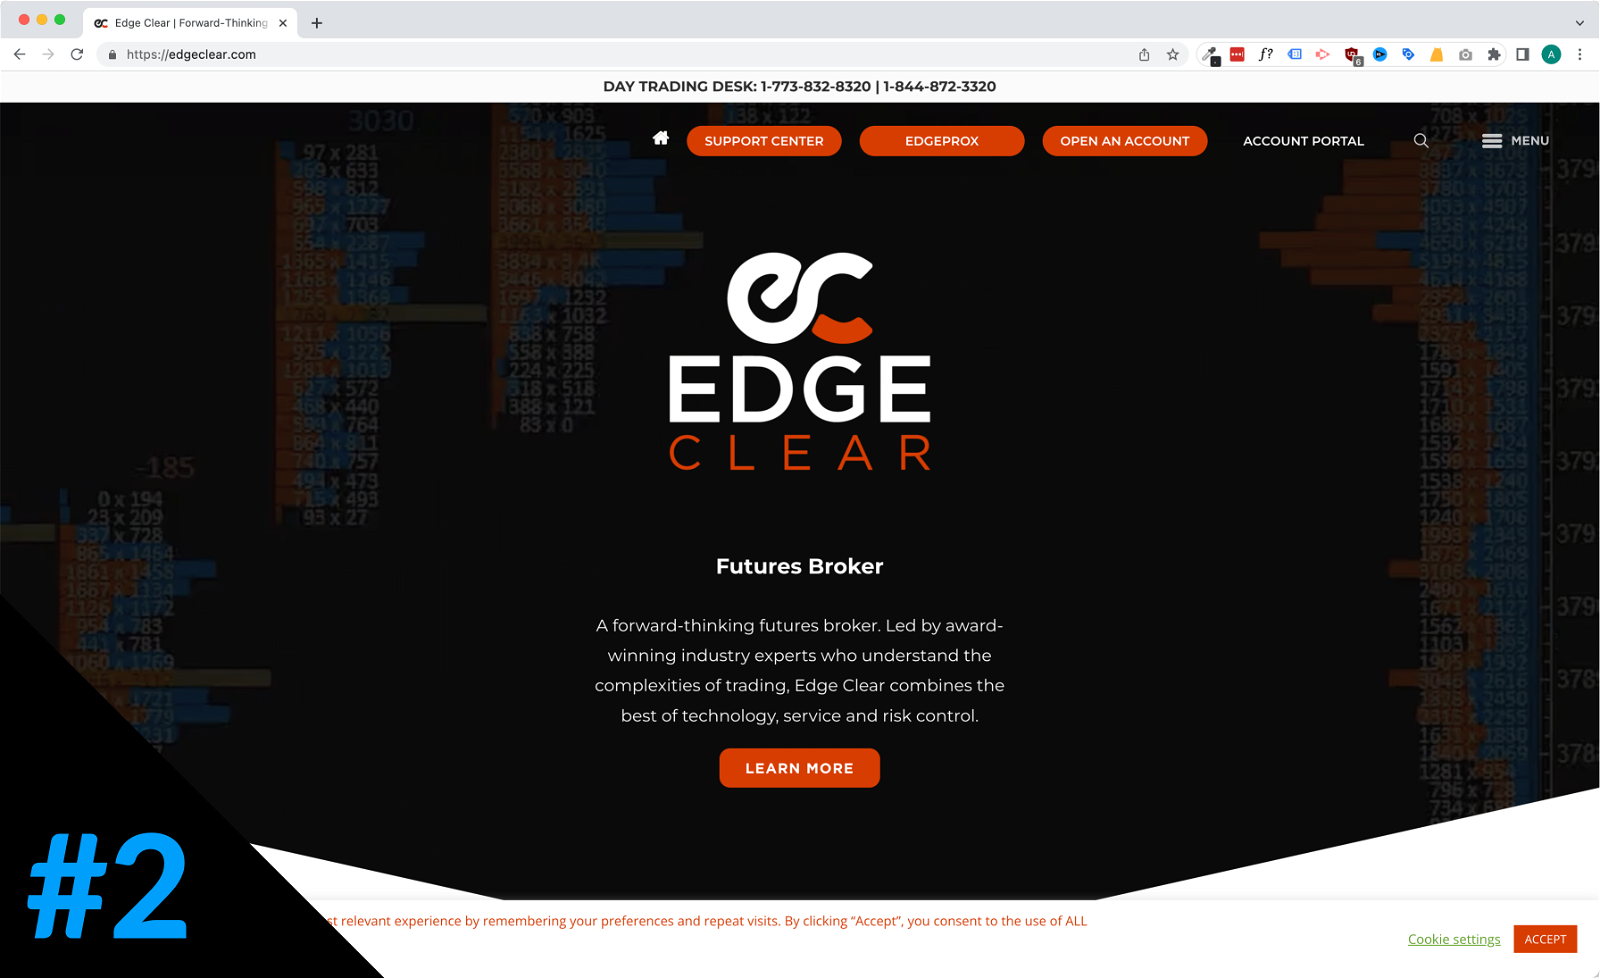 Screenshot of EdgeClear's Website with Review Rating